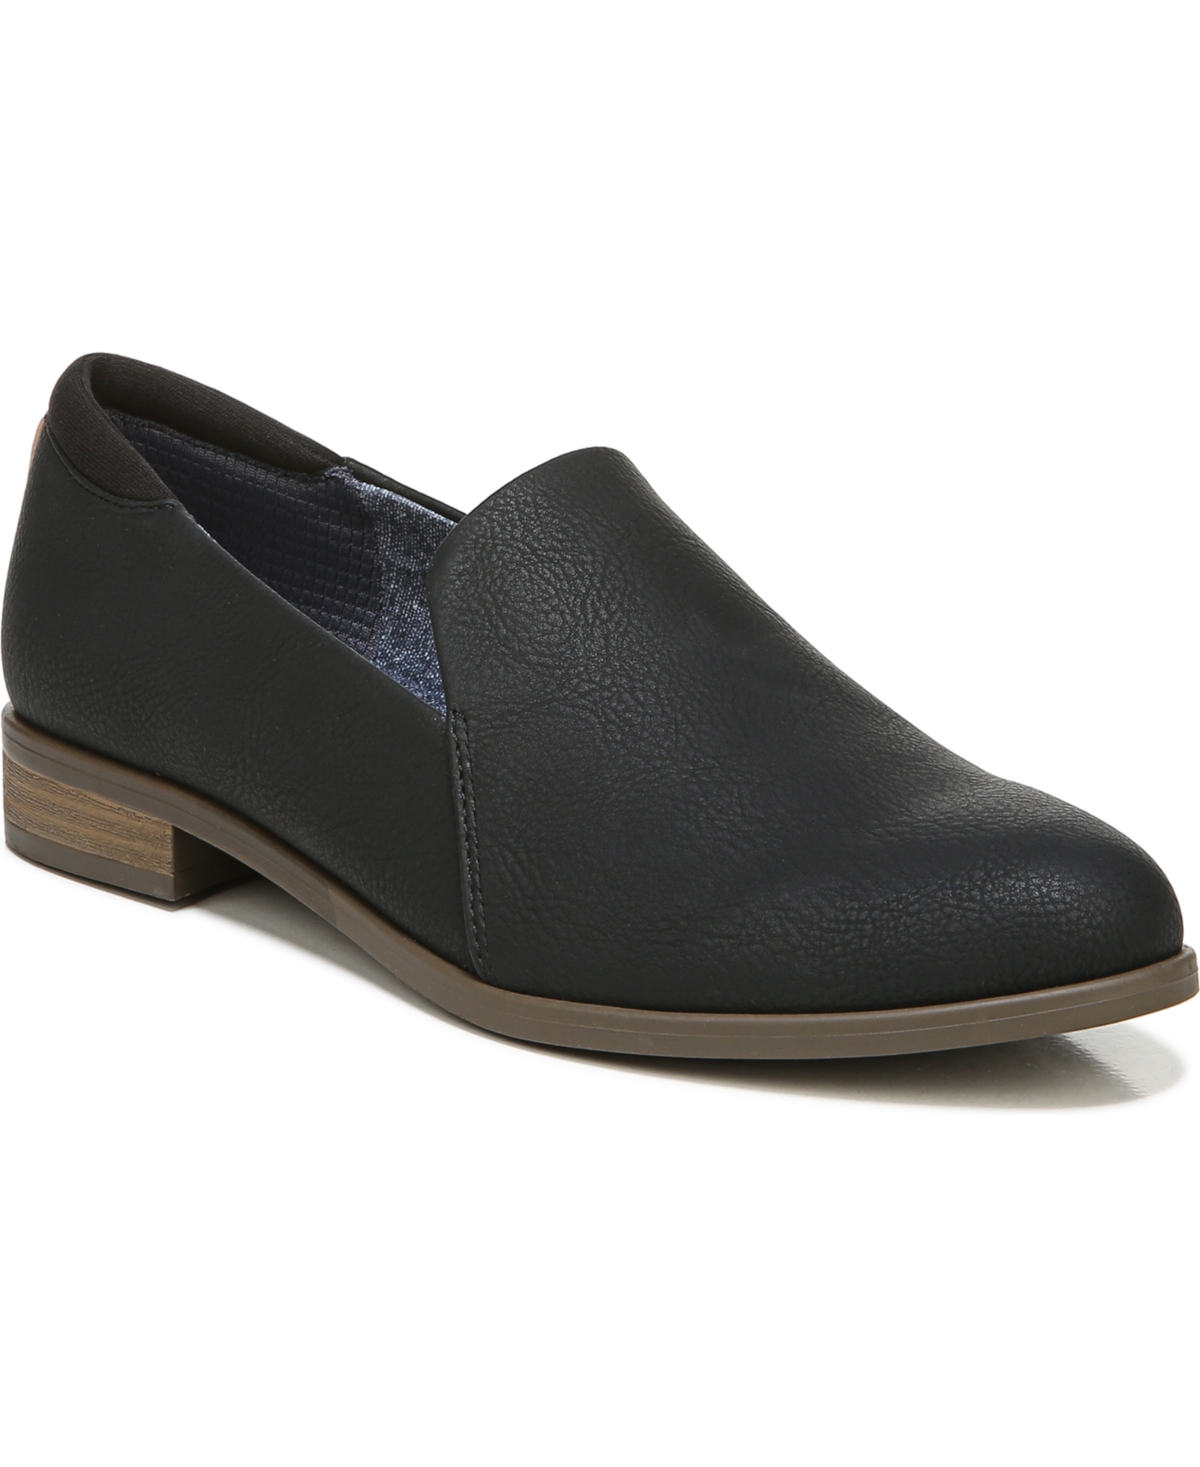 DR. SCHOLL'S WOMEN'S RATE LOAFER SLIP-ONS WOMEN'S SHOES